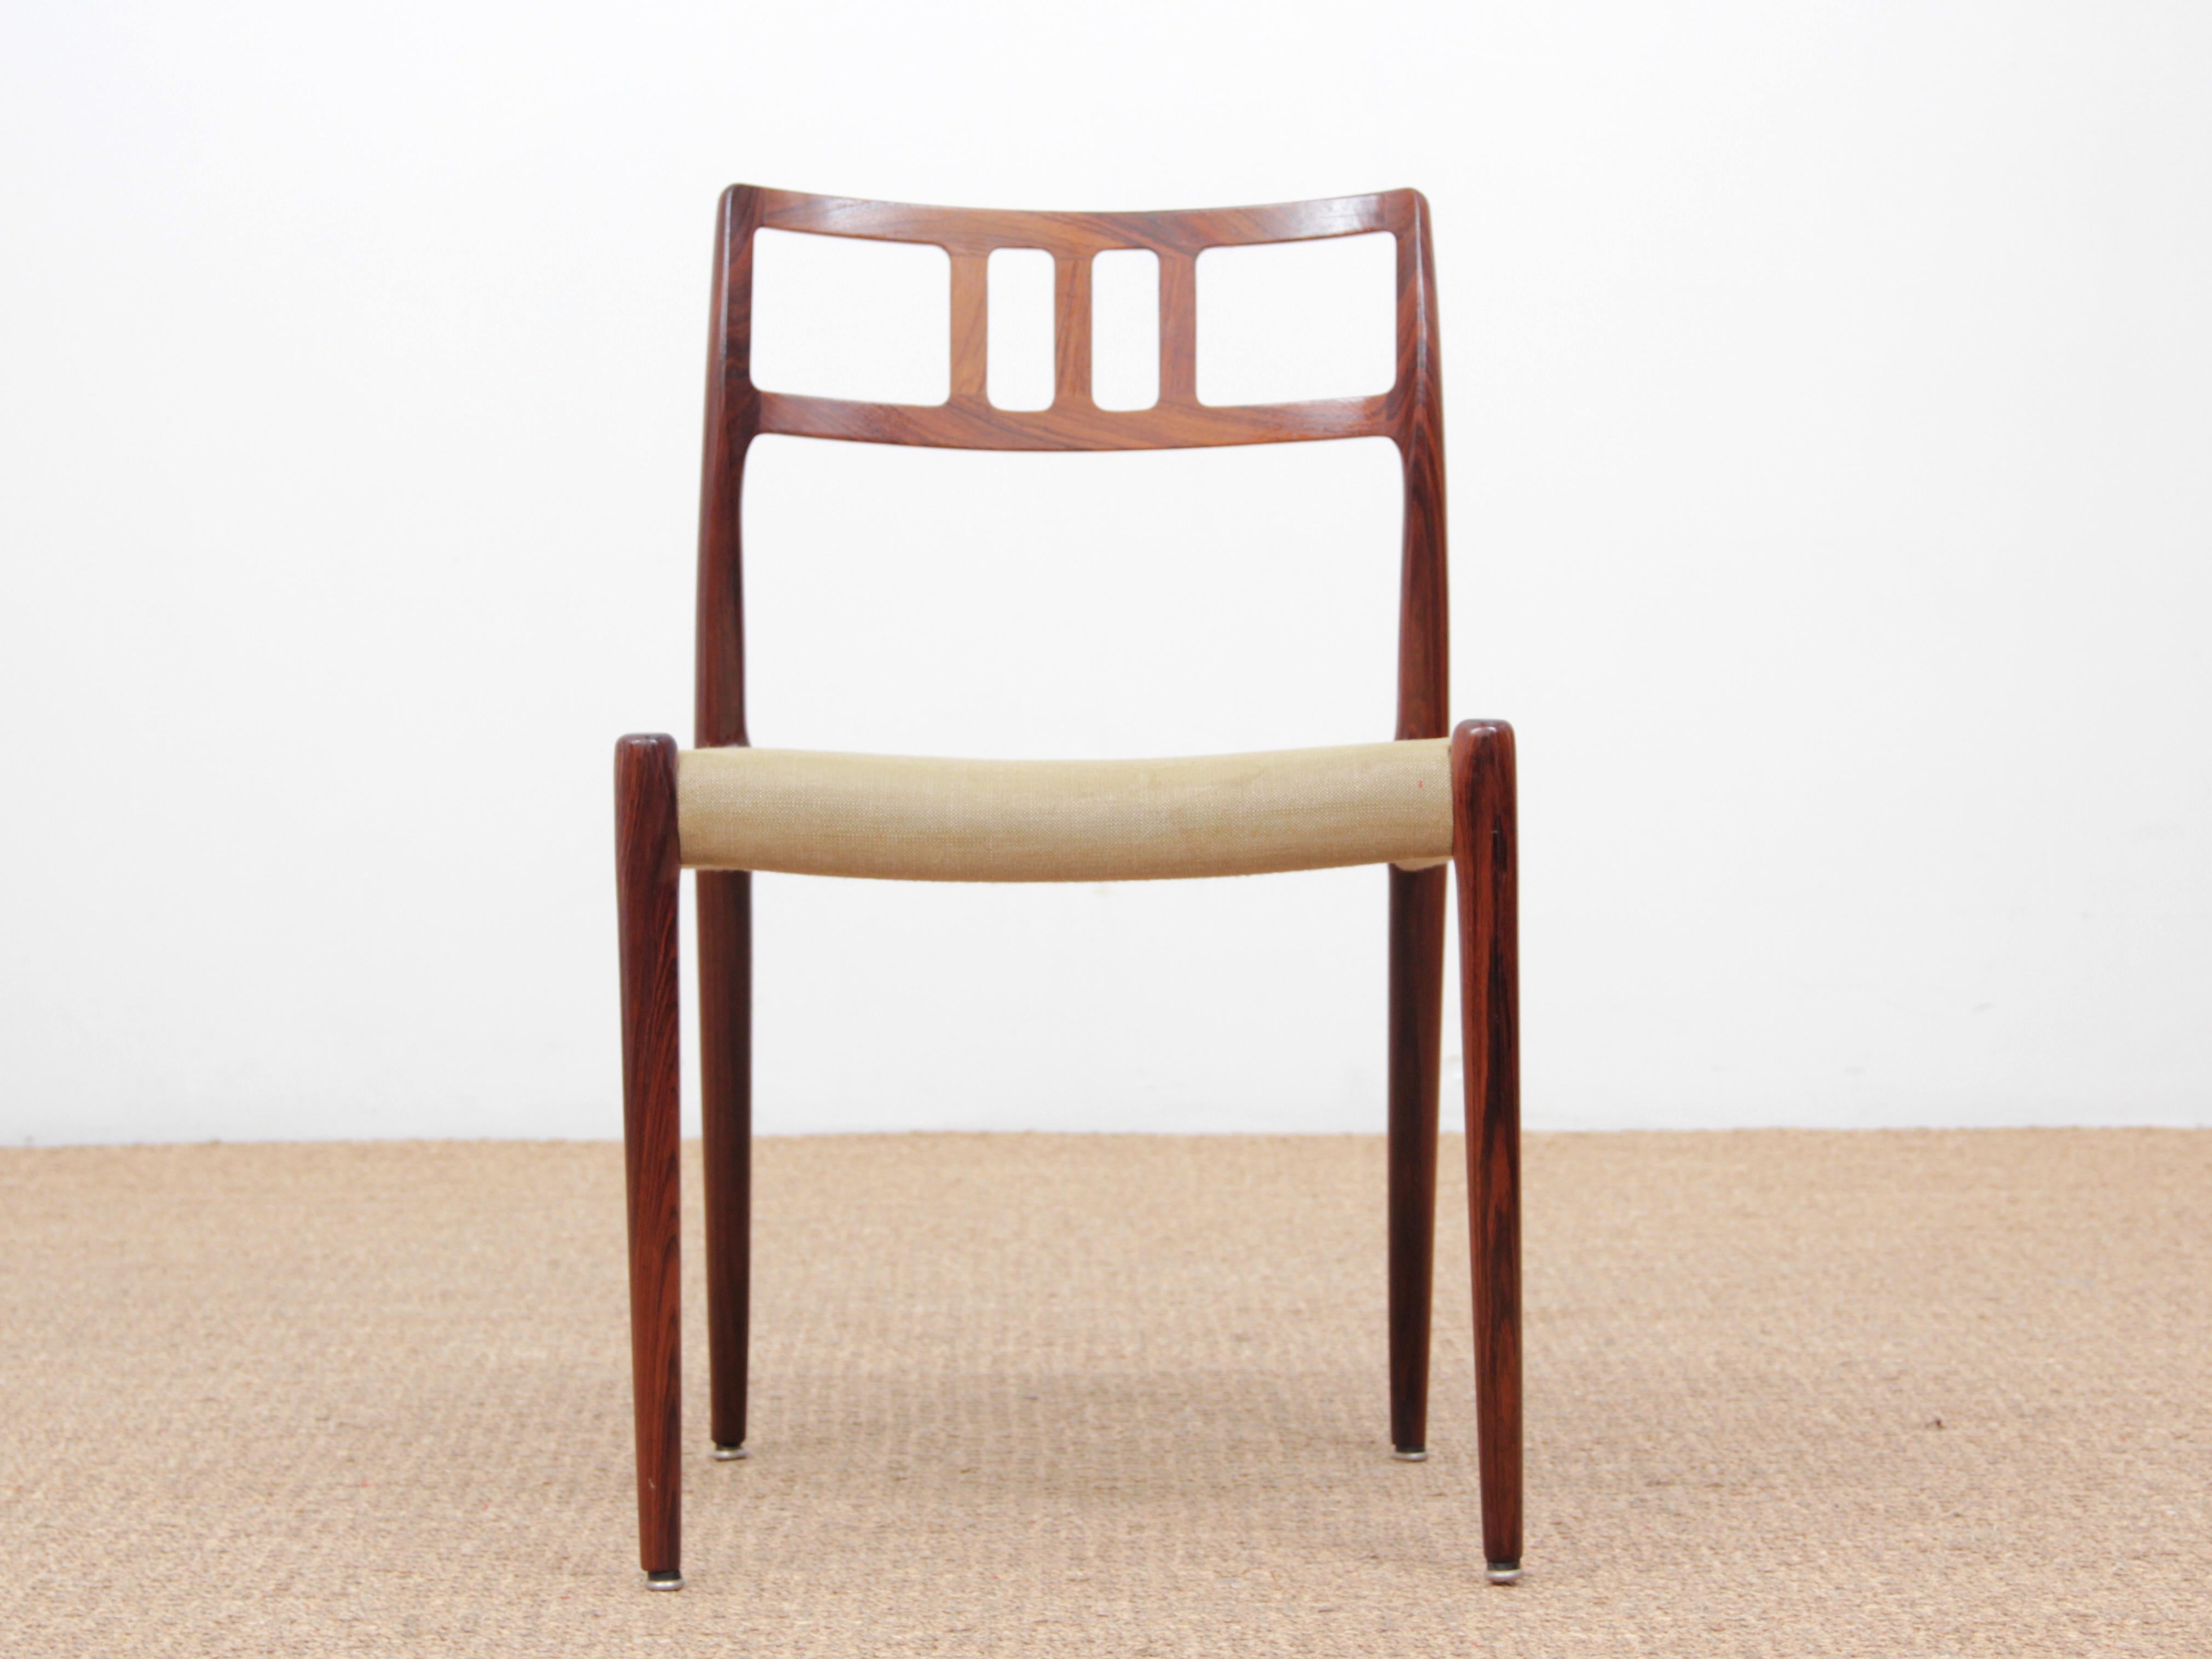 Mid-Century Modern Scandinavian set of 6 chairs by Niel Møller in rosewood. Original cover seats needed to be reupholstered. New upholstery on demand, leather or fabric : + €220 per chair. Delivery time 4 weeks.